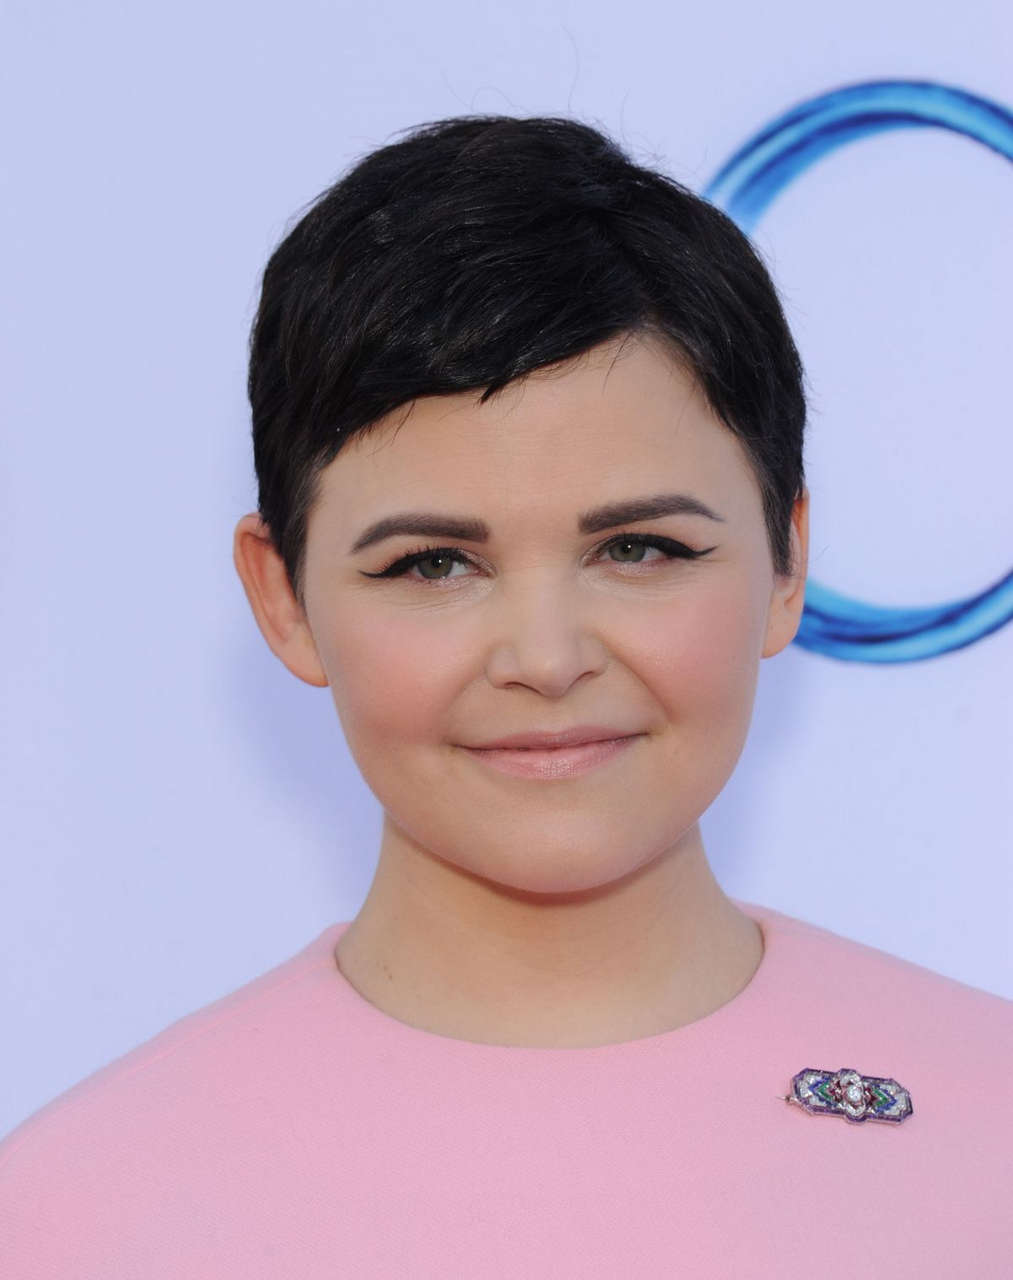 Ginnifer Goodwin Once Upon Time Season 4 Screening Hollywood